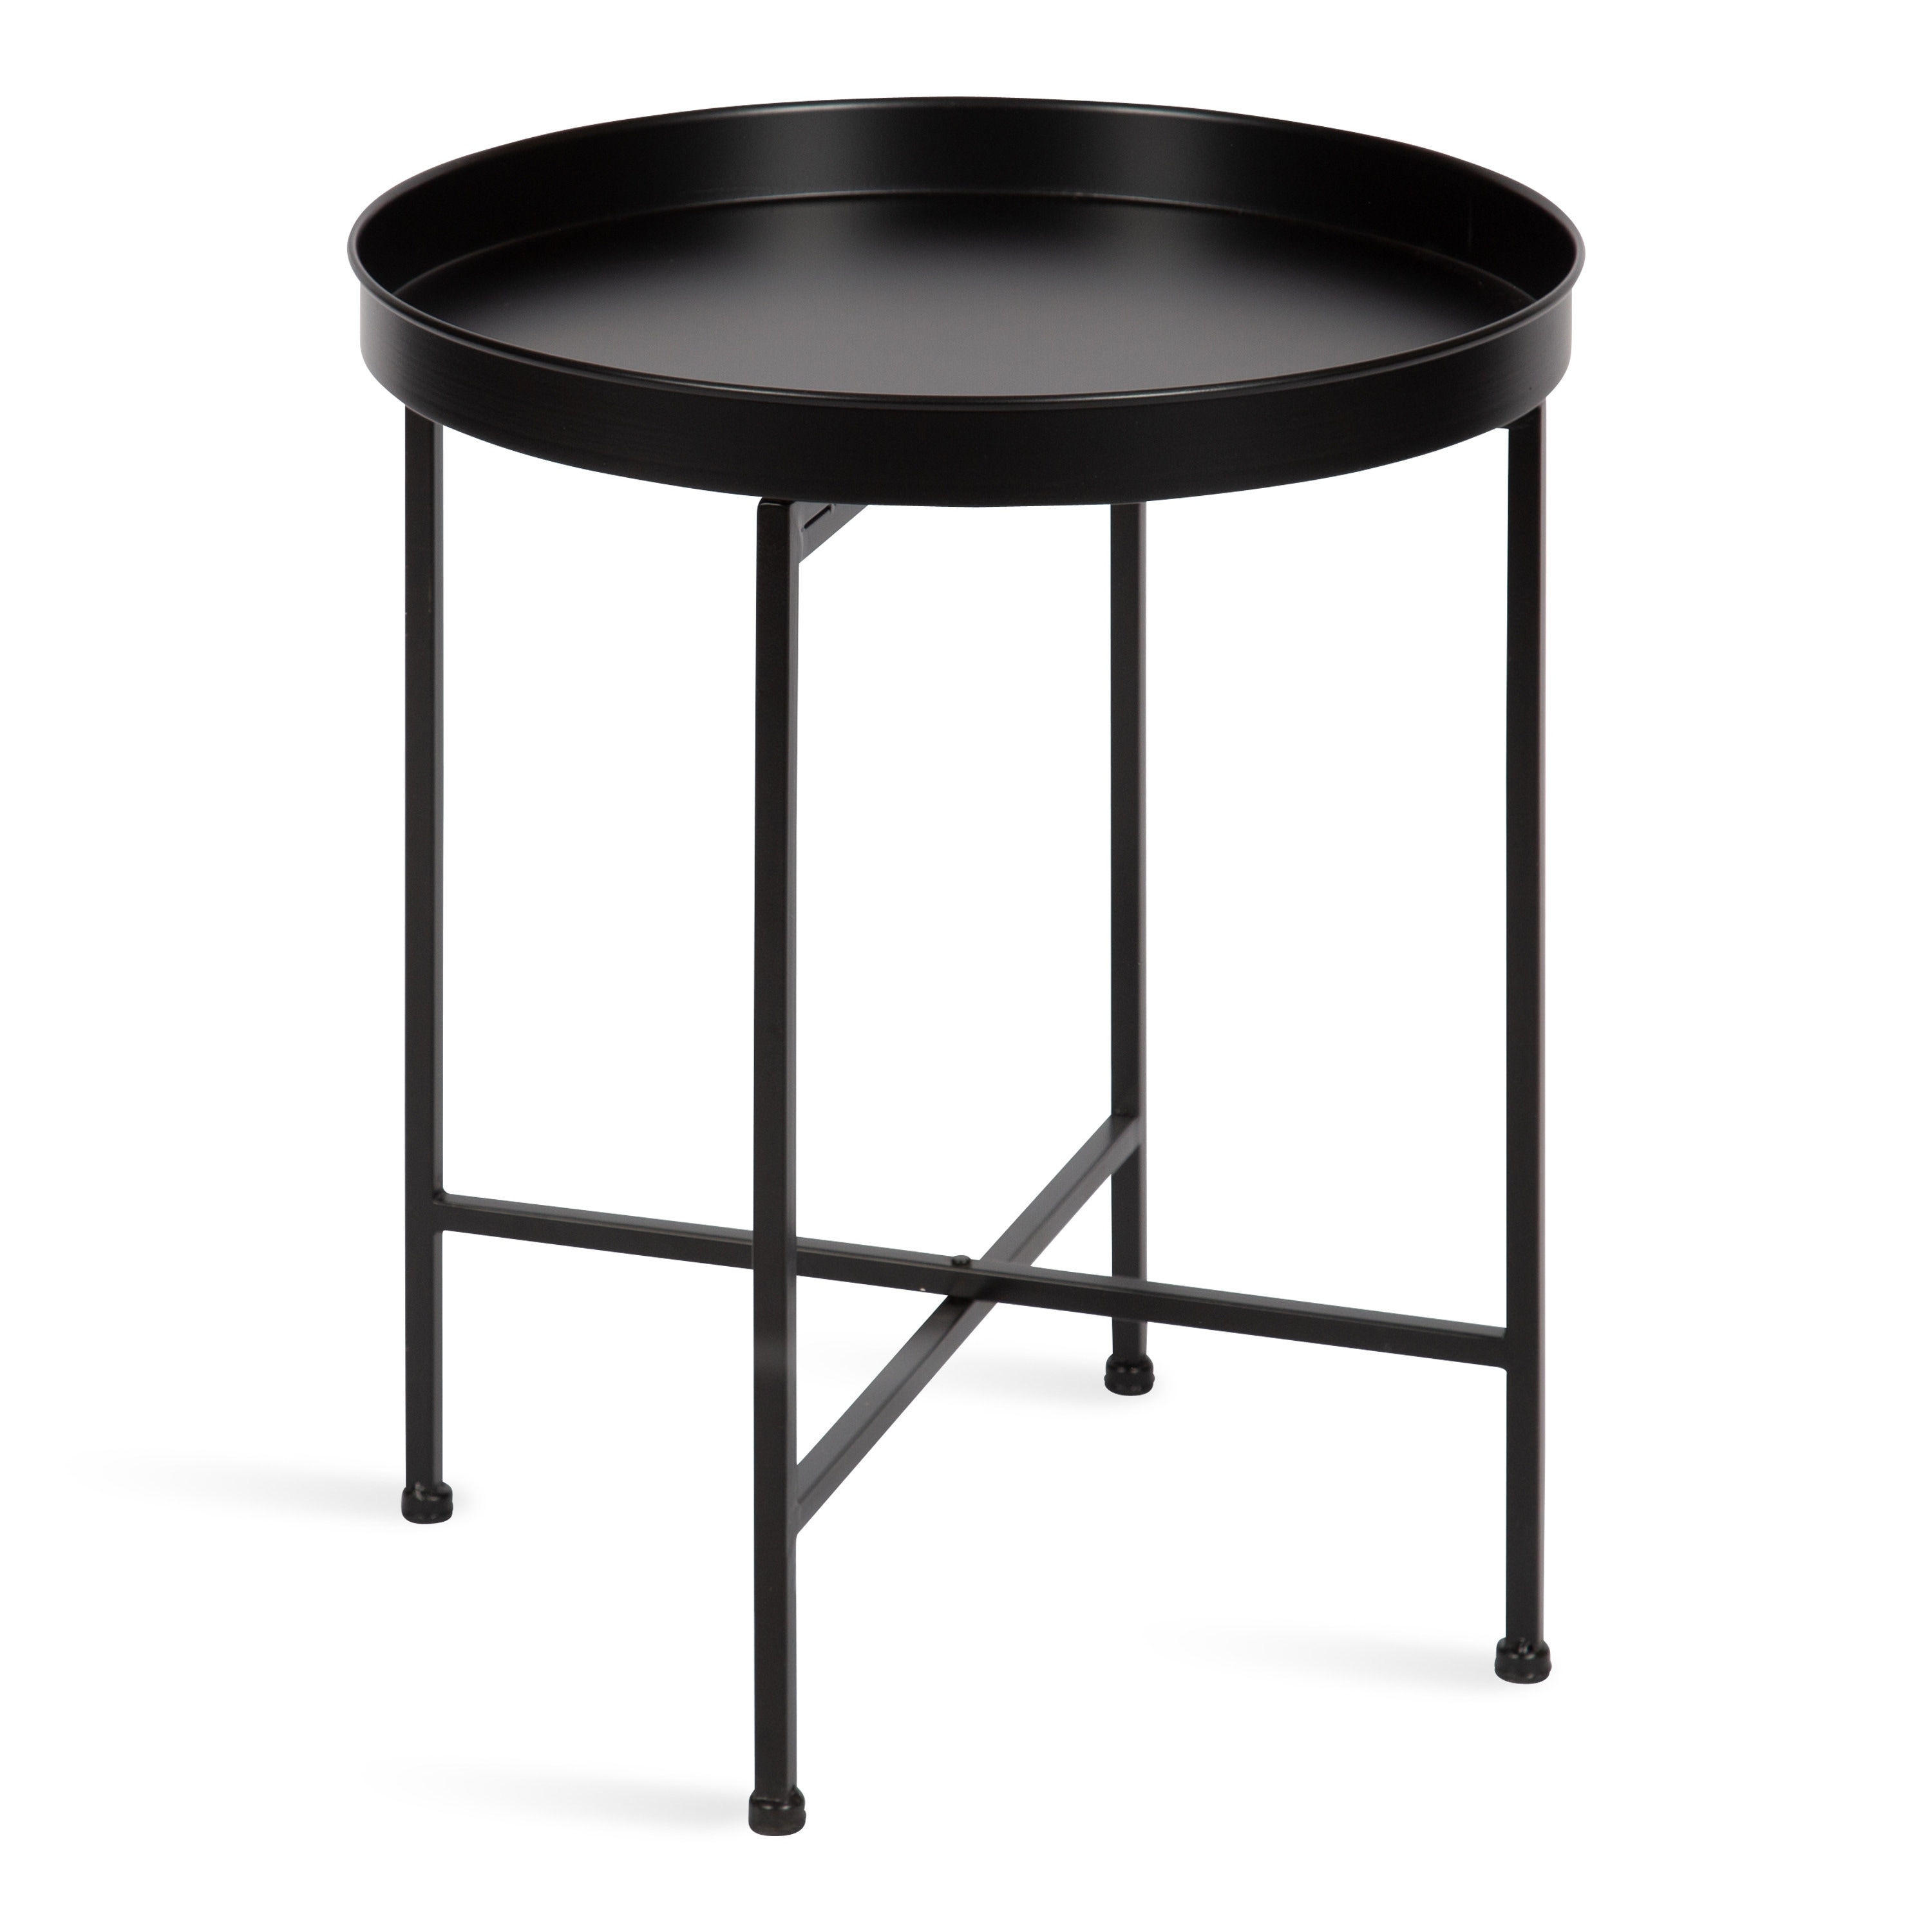 Chic Minimalist End Table for Storage and Display 20 x 20 x 20.5 Kate and Laurel Duvall Modern Round Metal Side Table Black 